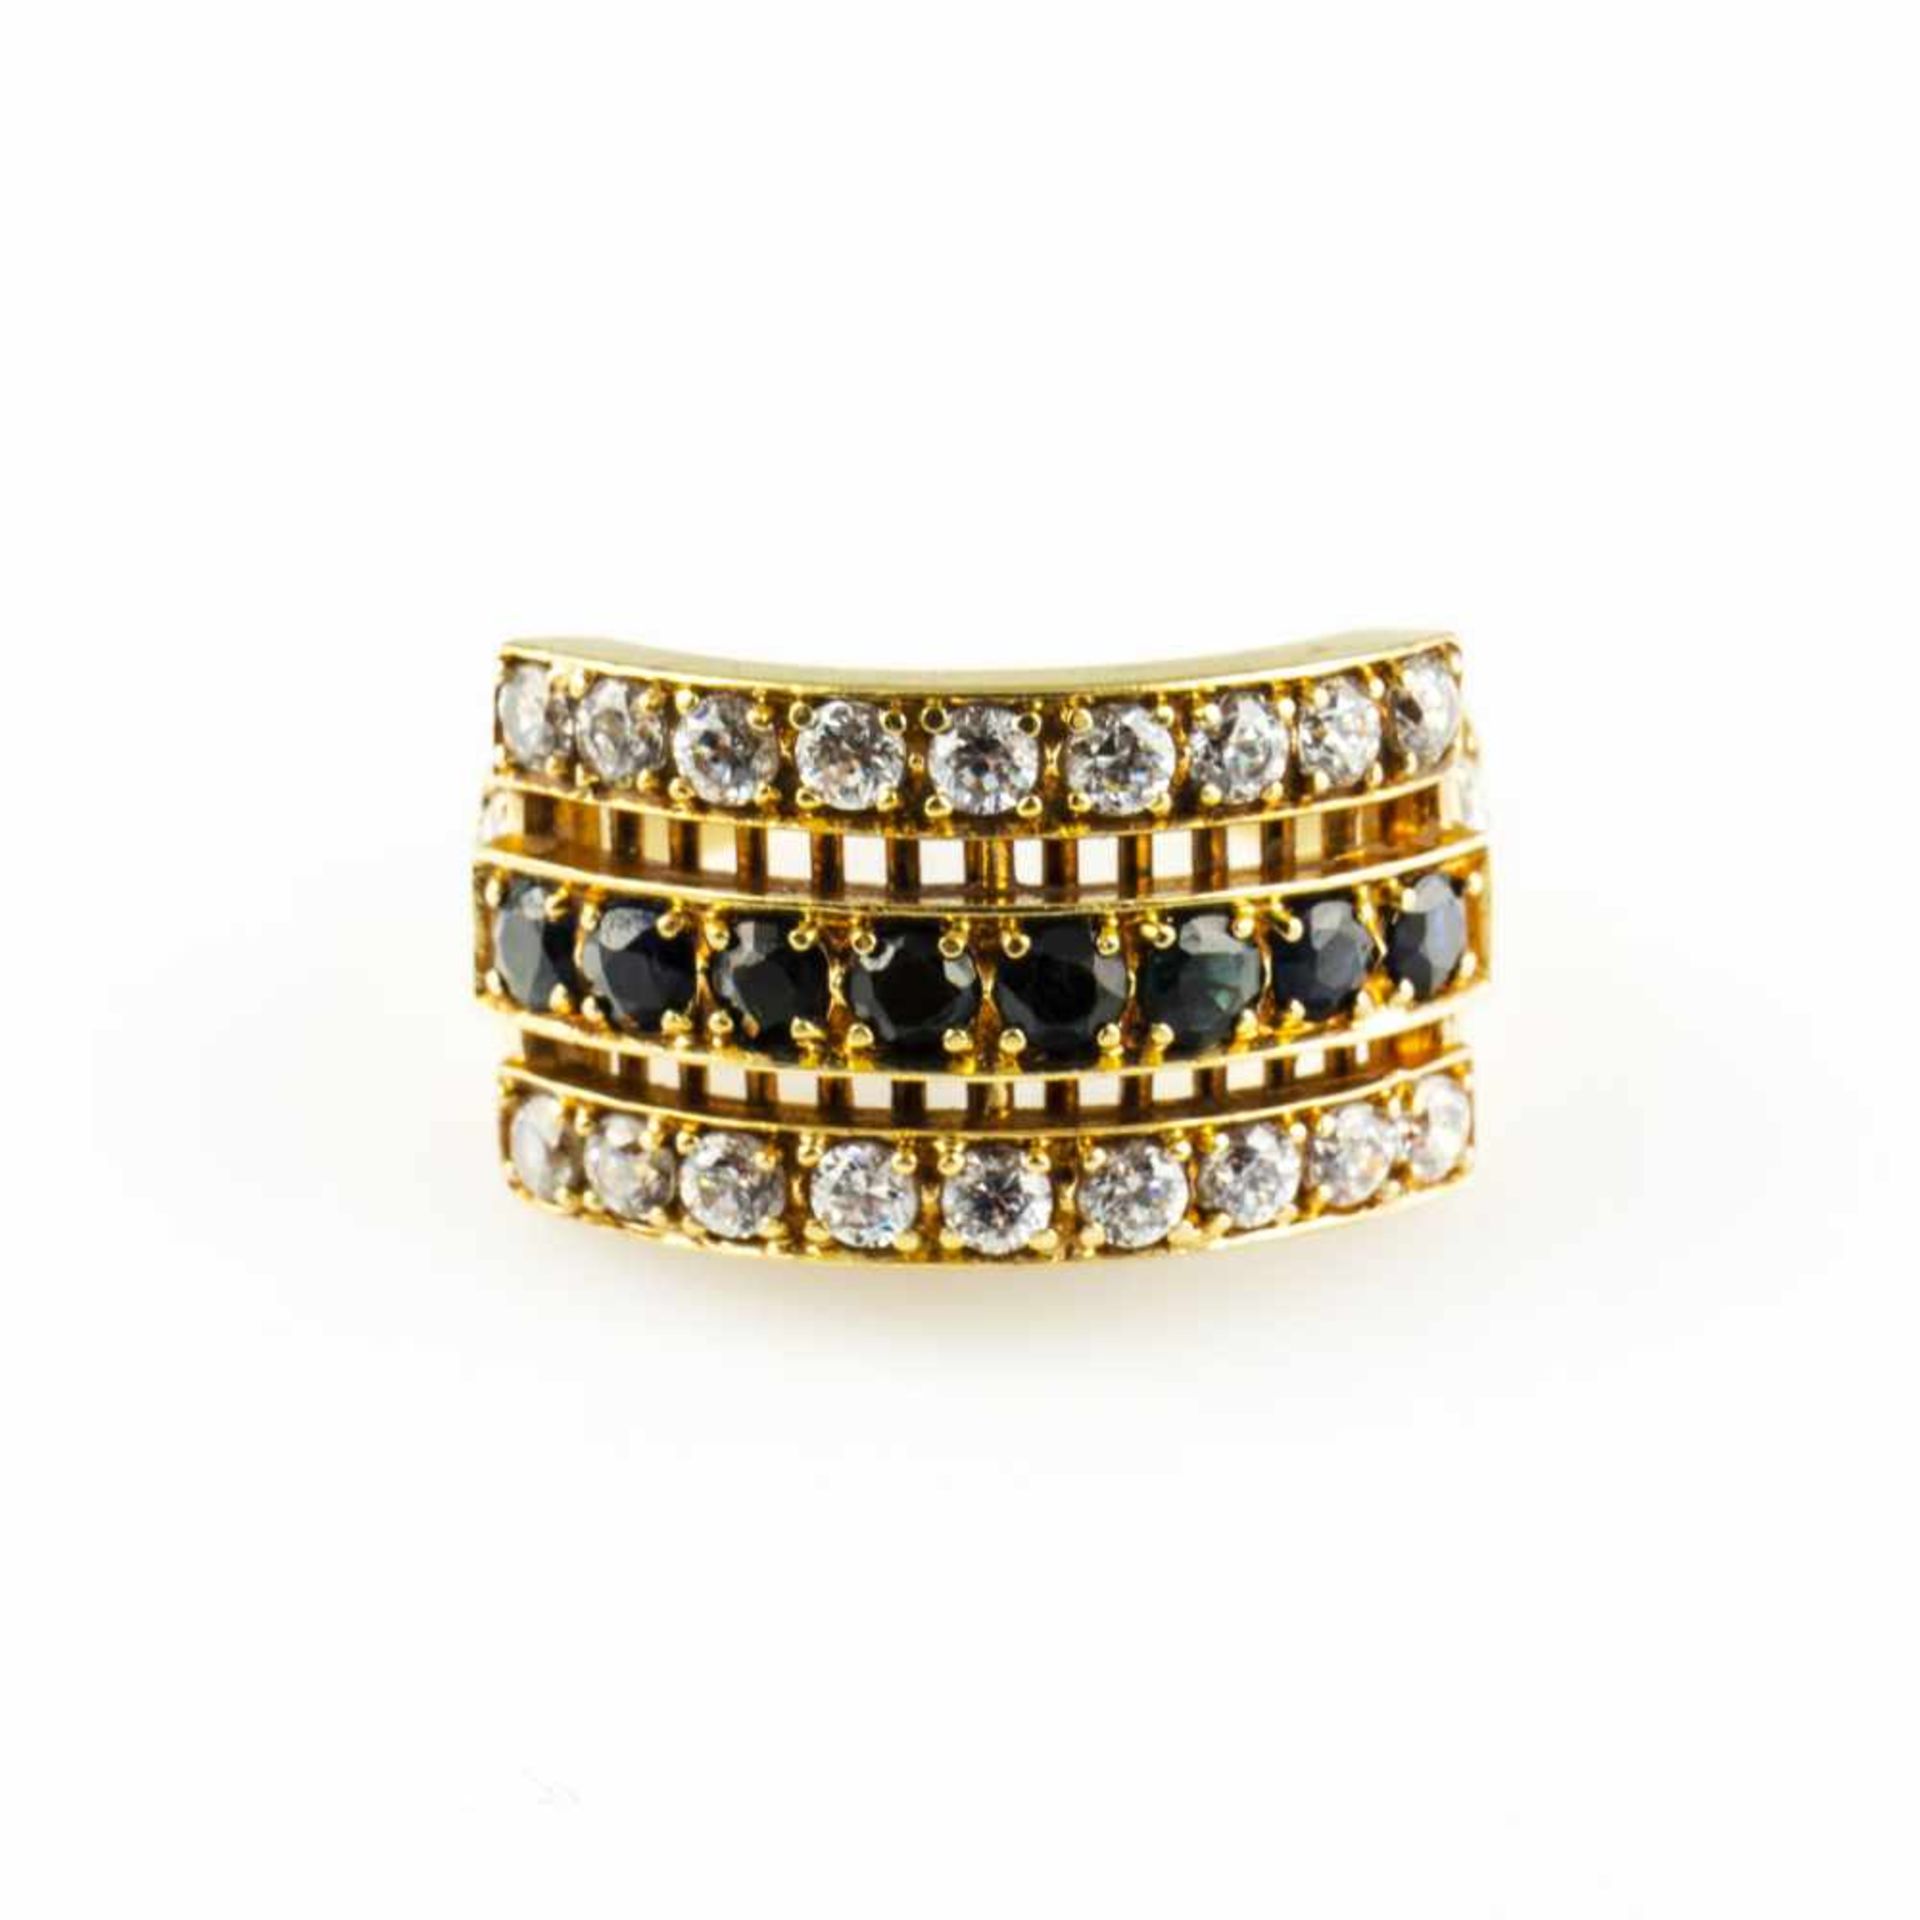 Ladies ring585 yellow gold, with 24 brilliants, total approx. 0.70 ct, vs-p1, JL, 8 faceted dark - Image 2 of 6